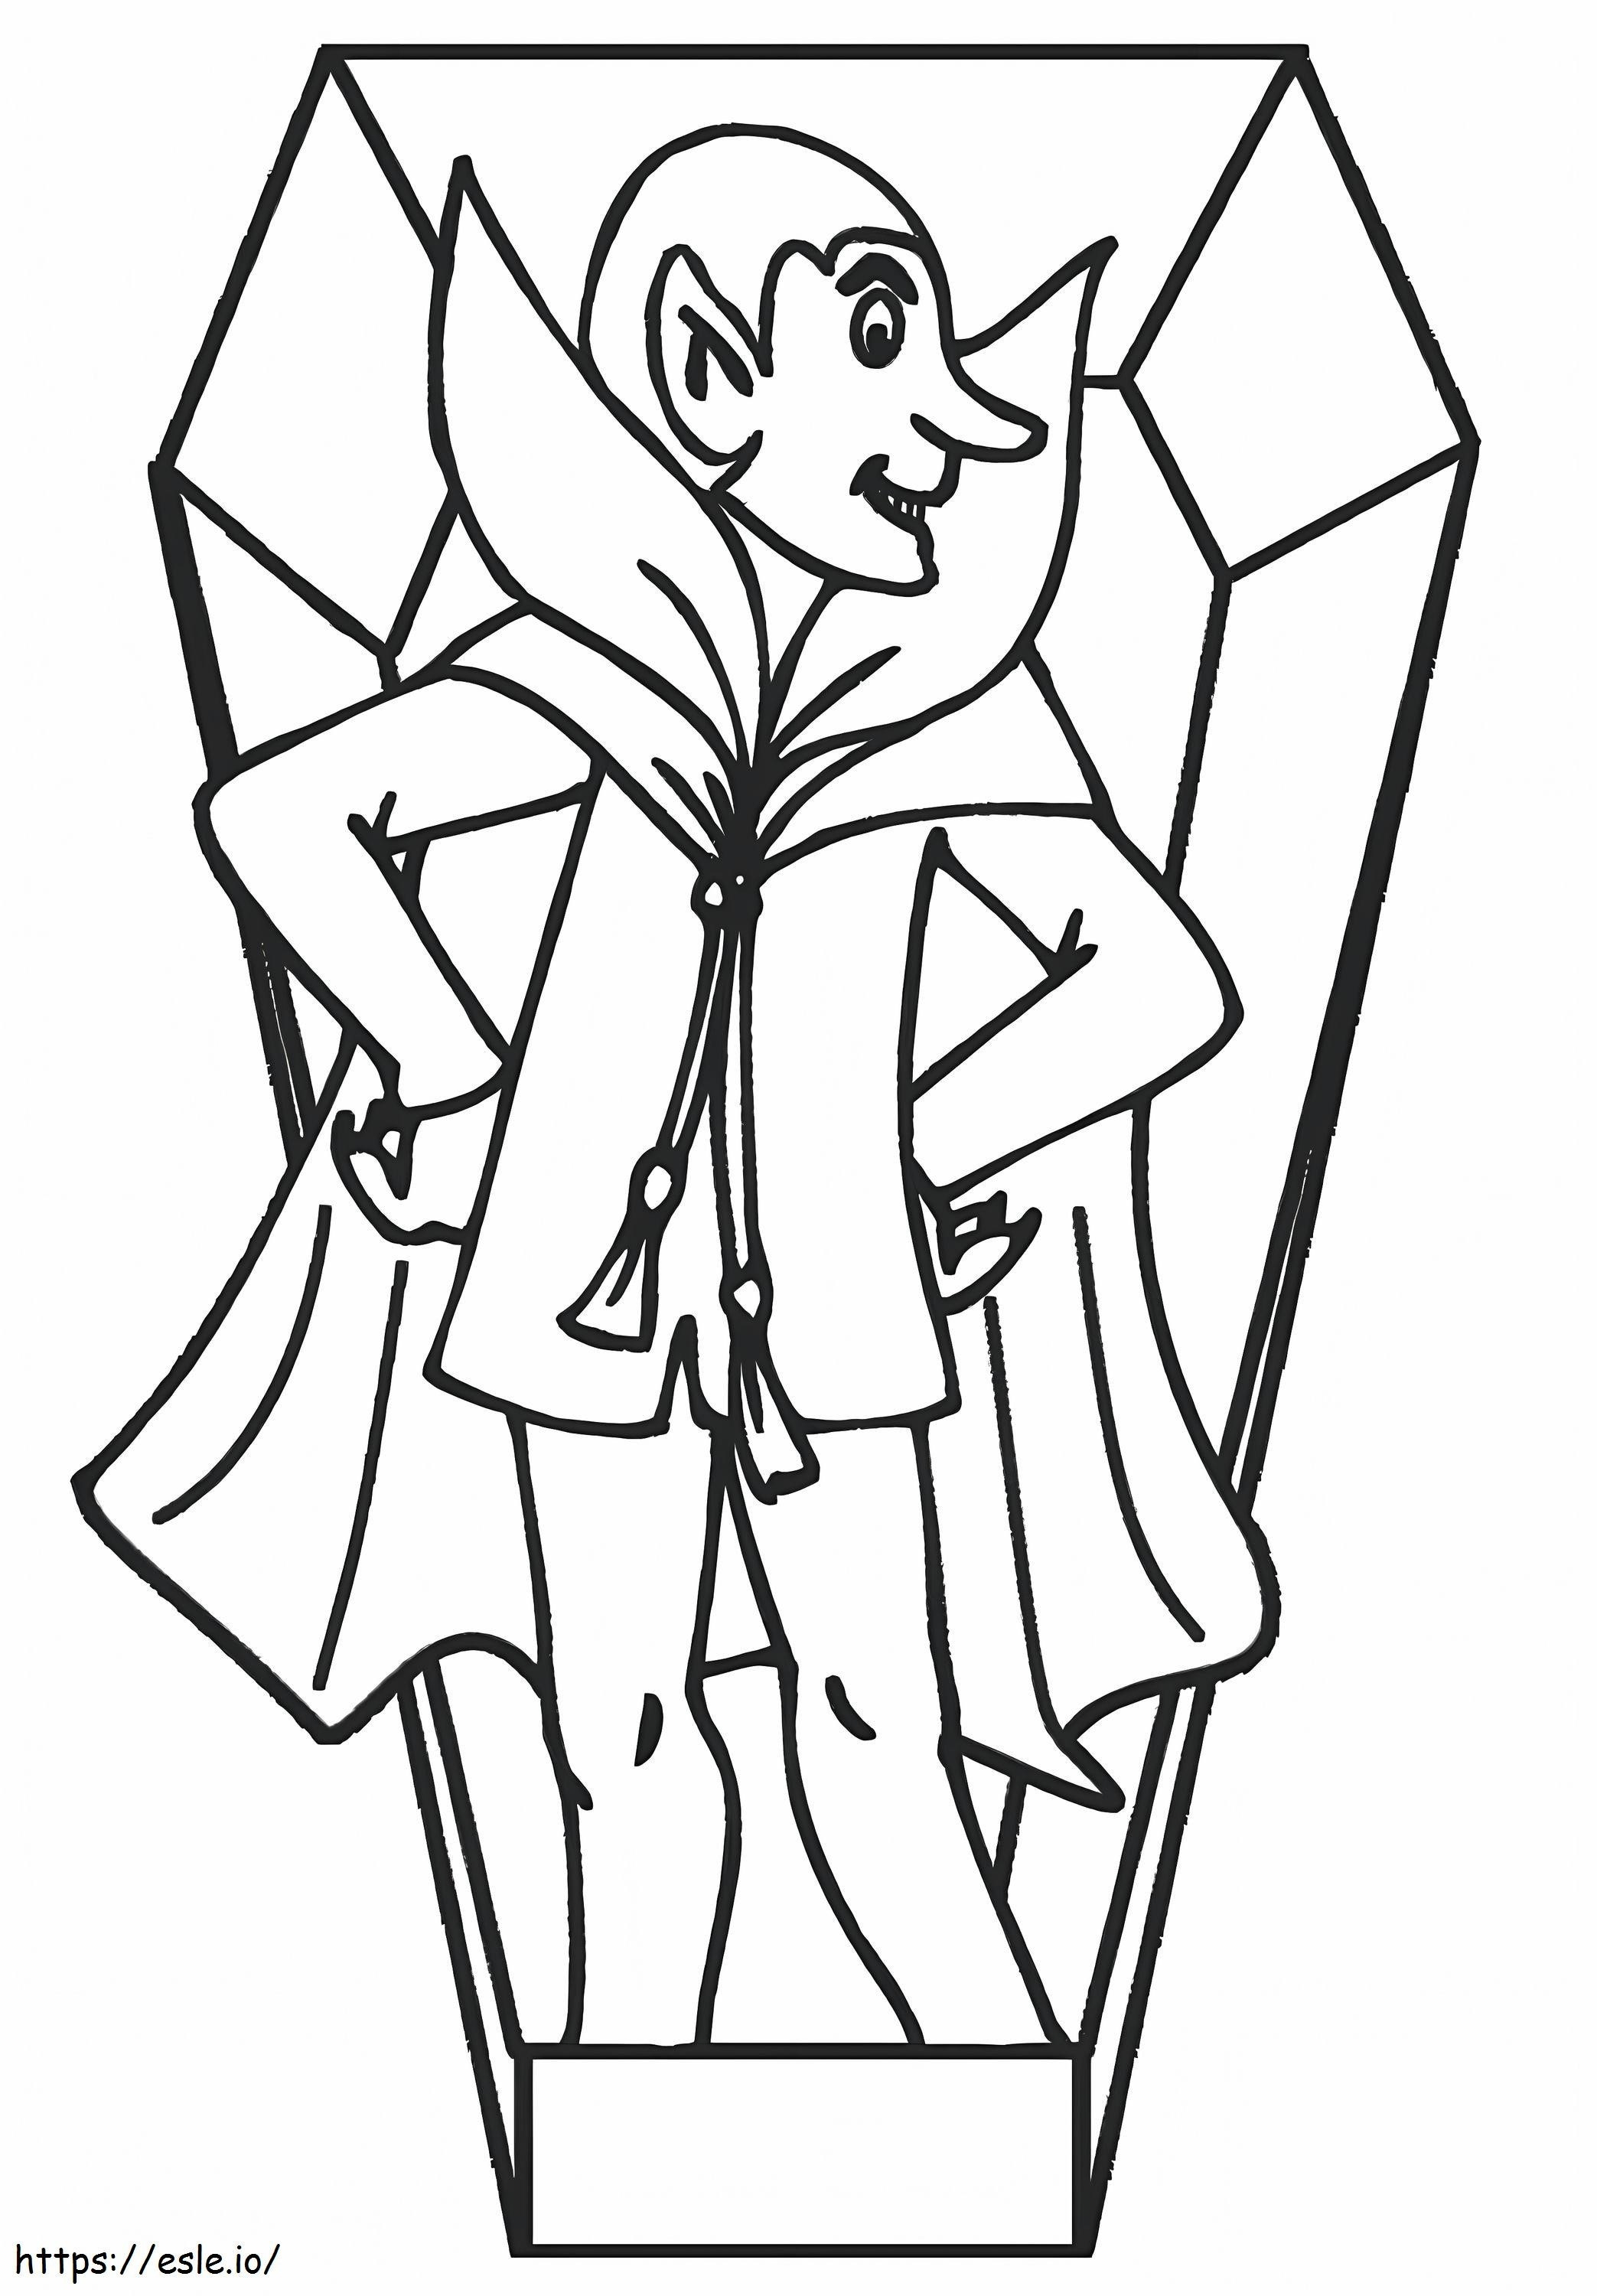 Vampire 6 coloring page